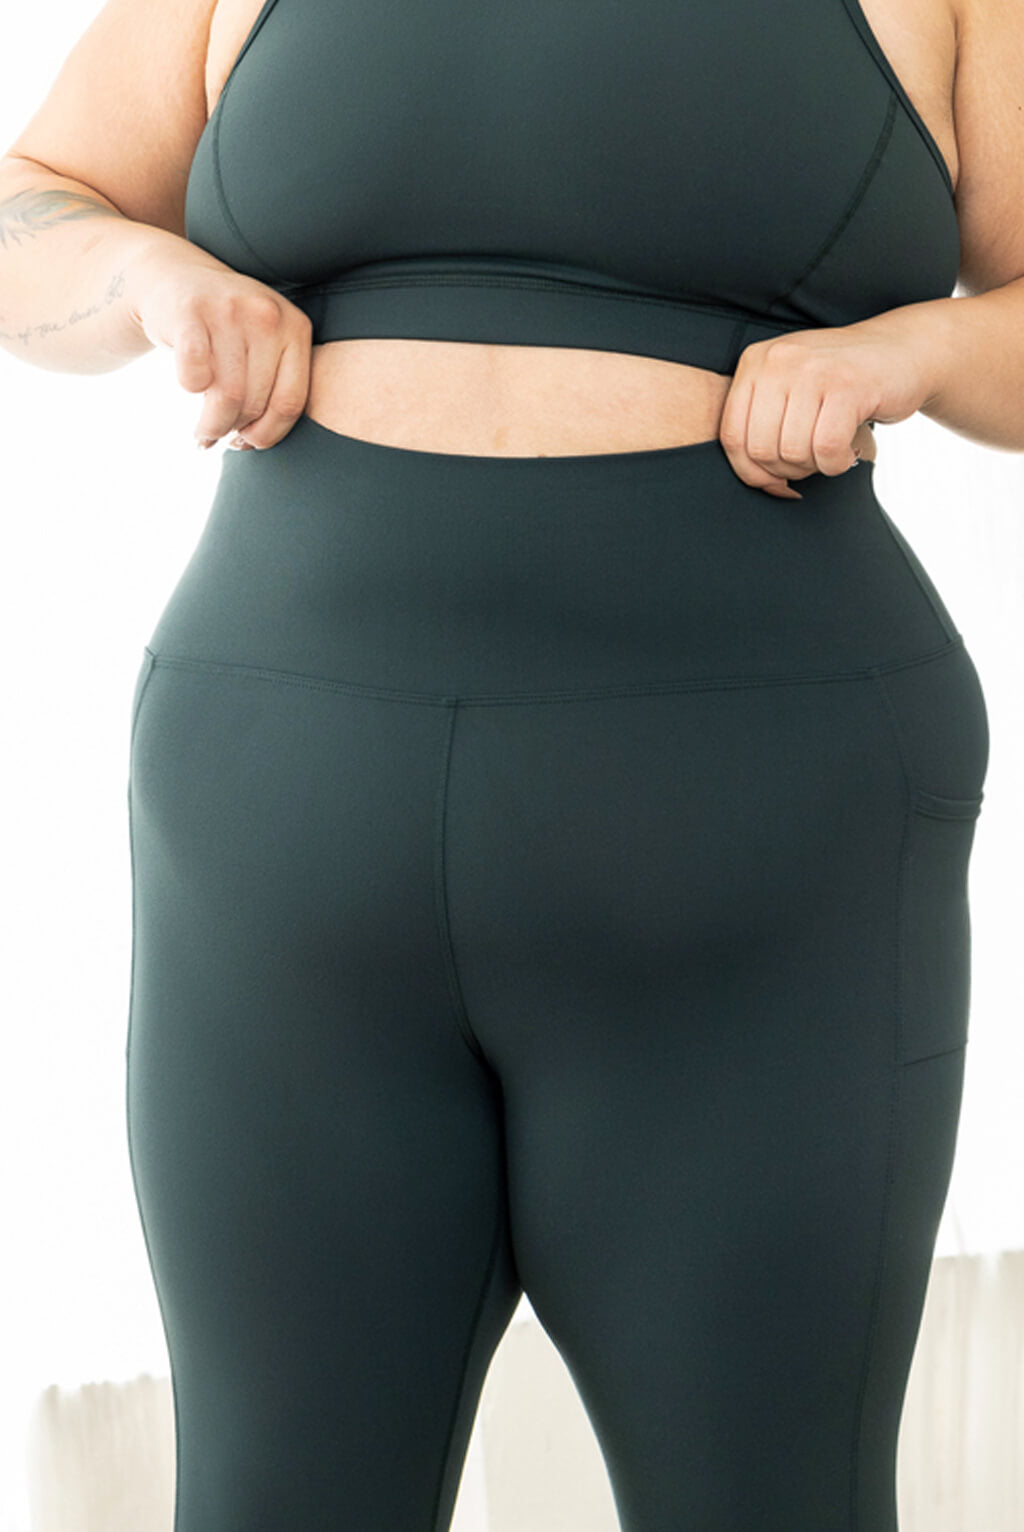 Plus Size Leggings with Pockets in Evergreen_high compression waist band